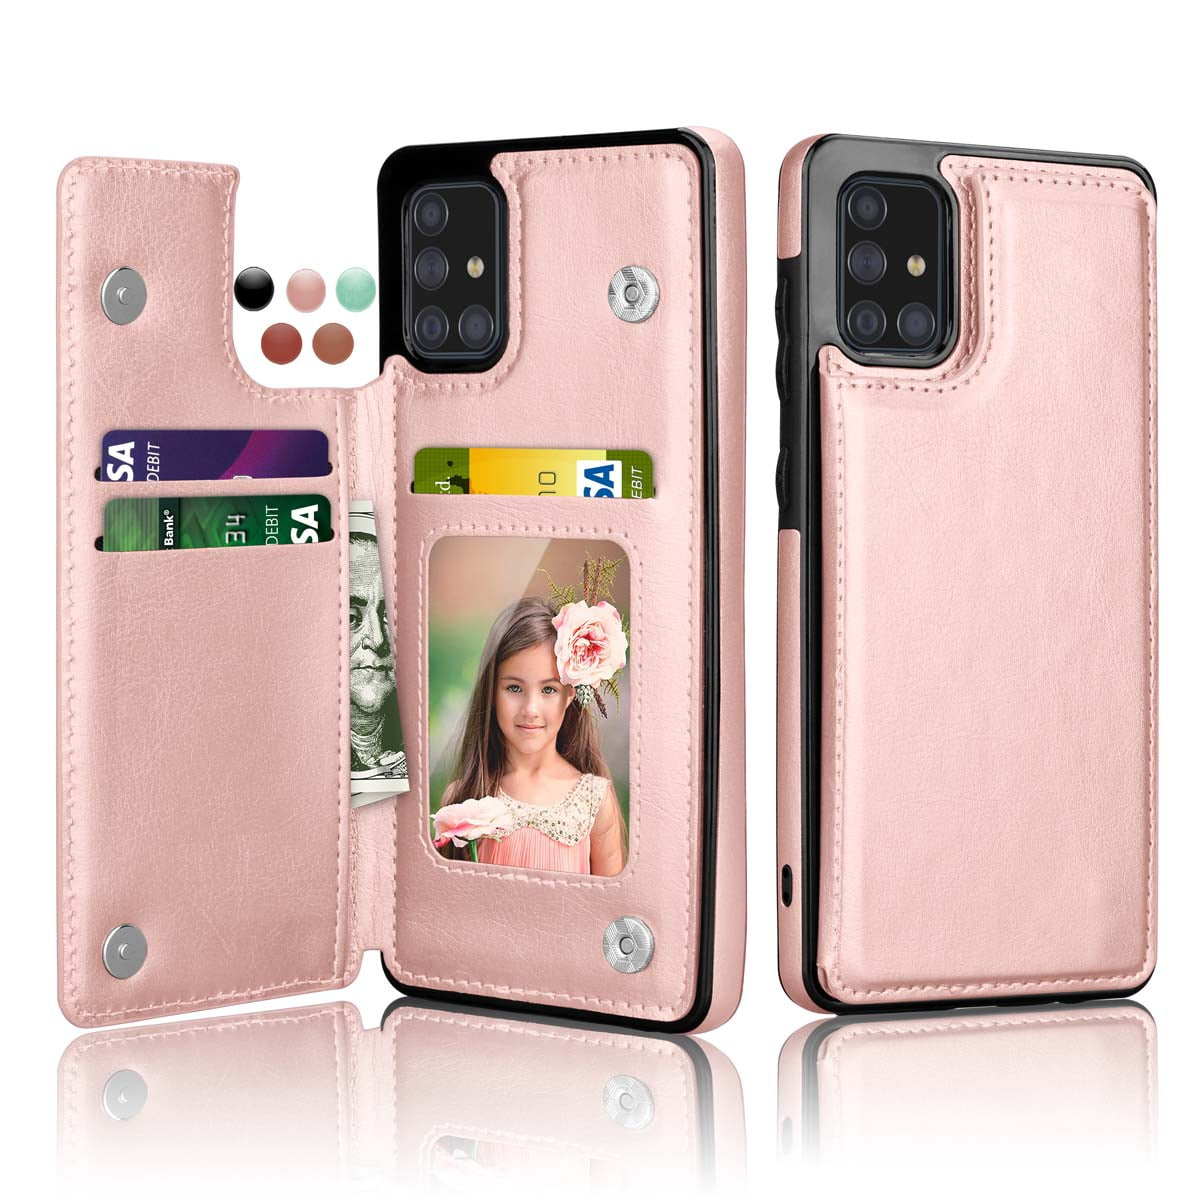 XiaYong A71 4G for Samsung Galaxy A71 4G Case Fashion Square Box Women  Design Gold Bling Glitter Rose Flower Soft Trunk Cover with Ring Kickstand